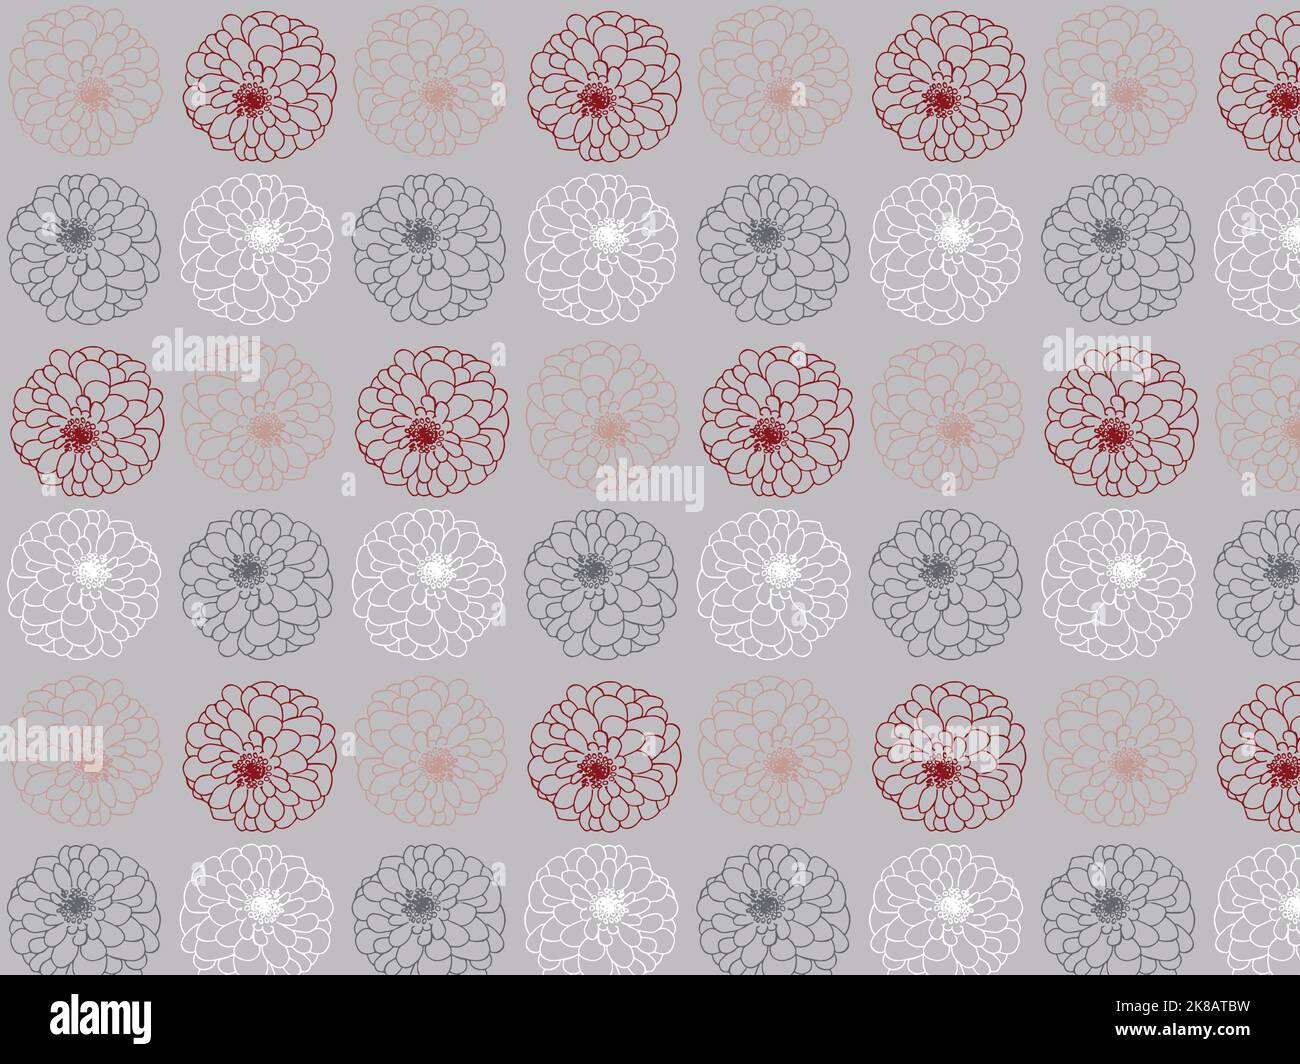 Floral pattern Stock Vector